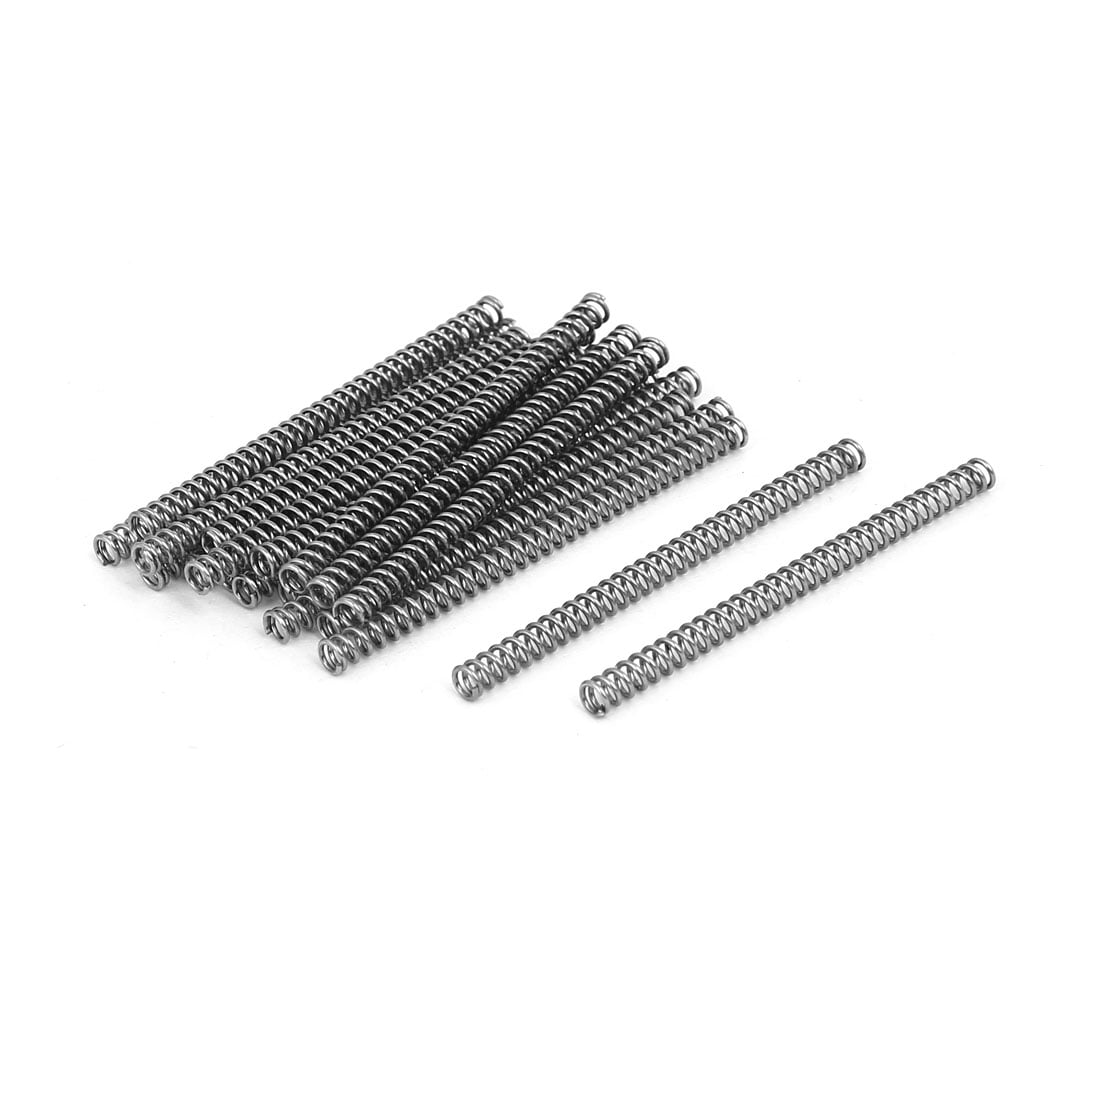 0.5mmx3mmx45mm 304 Stainless Steel Compression Springs 10pcs